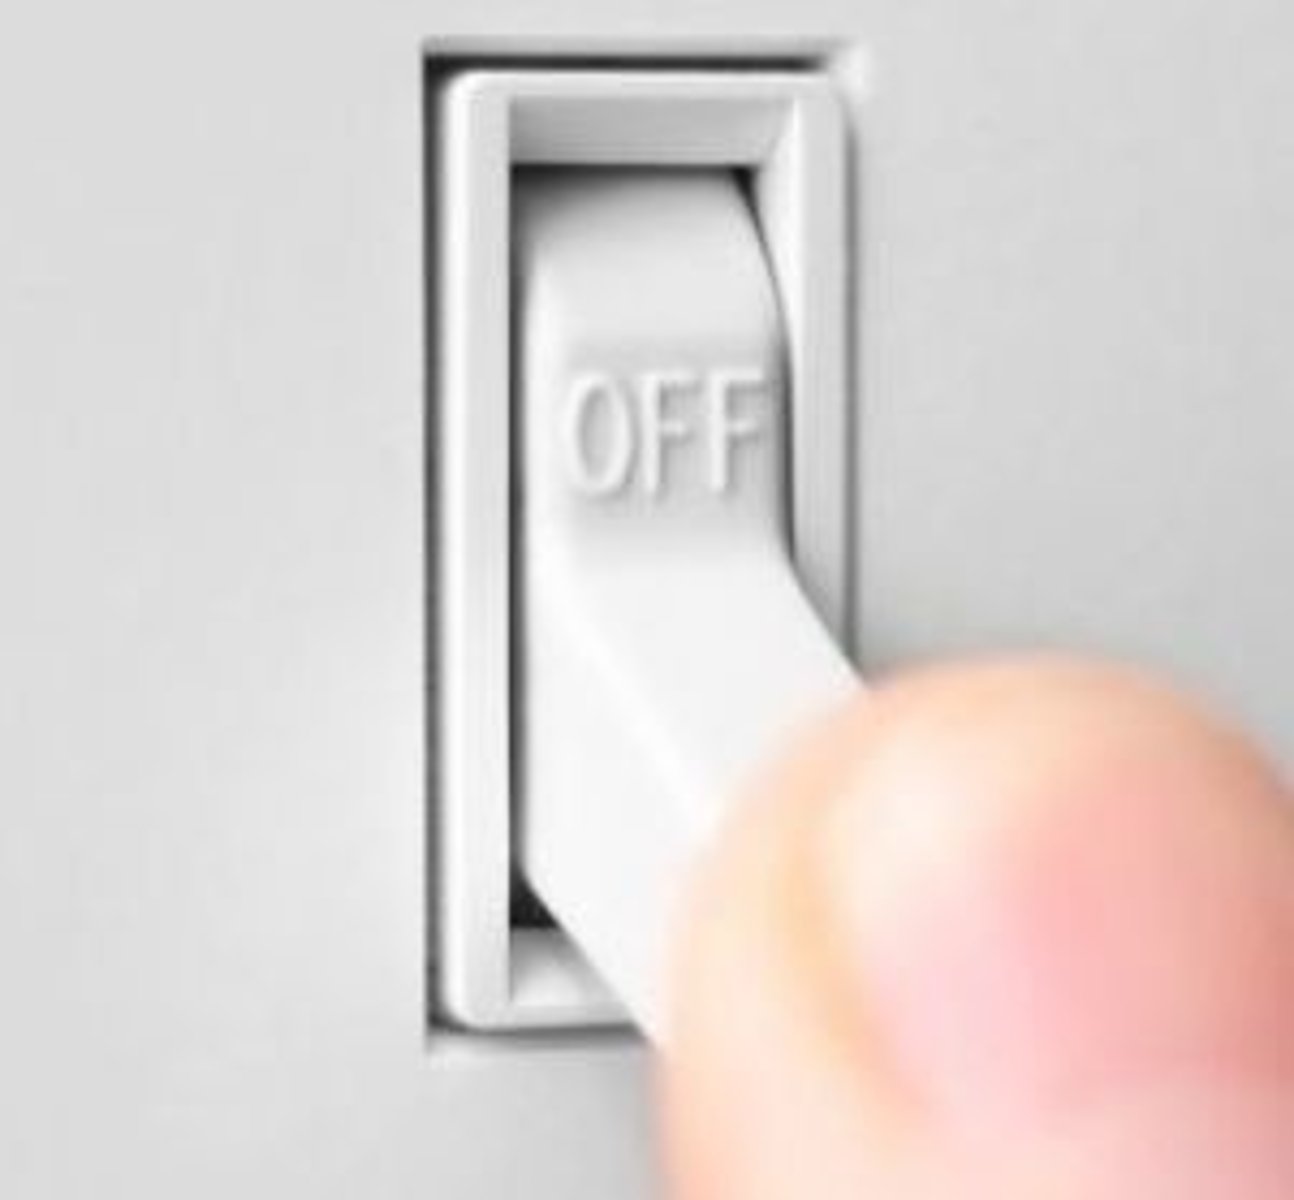 <p>To turn off the light</p>